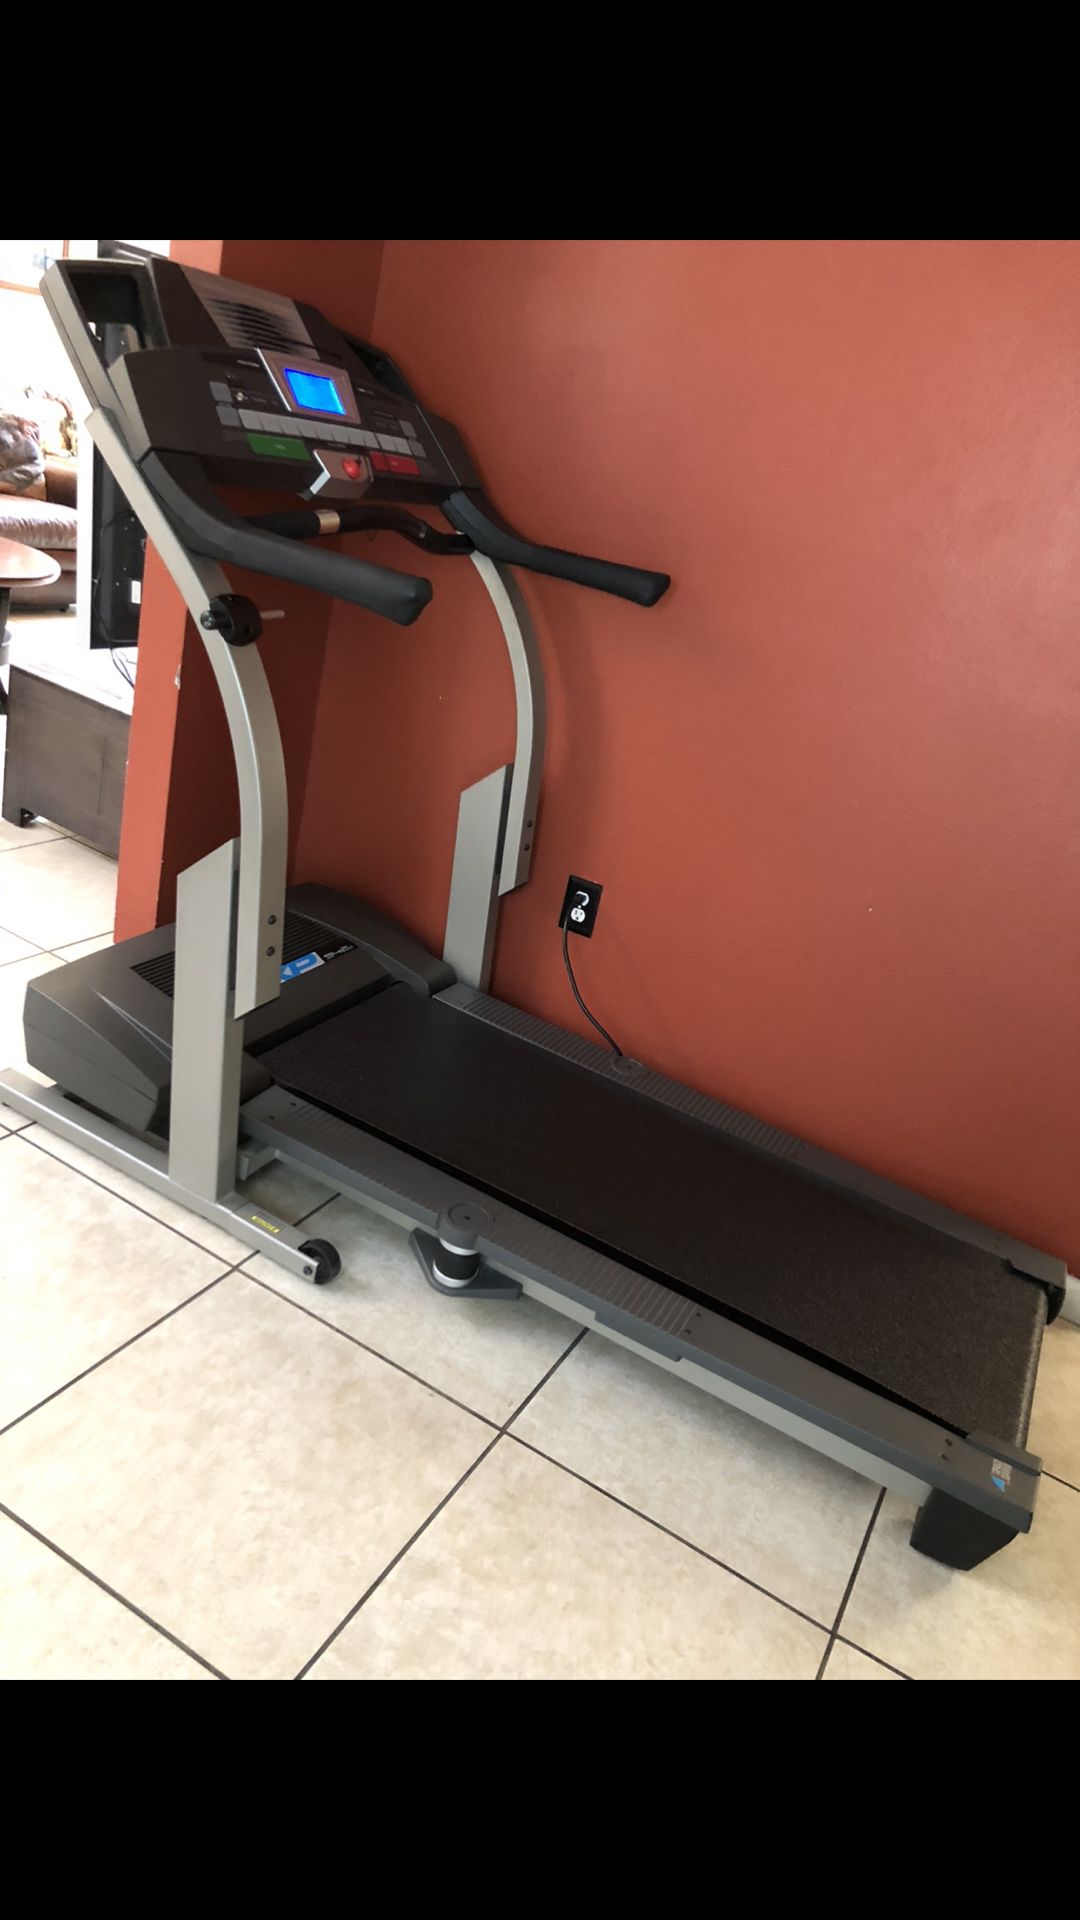 Treadmill pro-form everything works perfect and perfect conditions